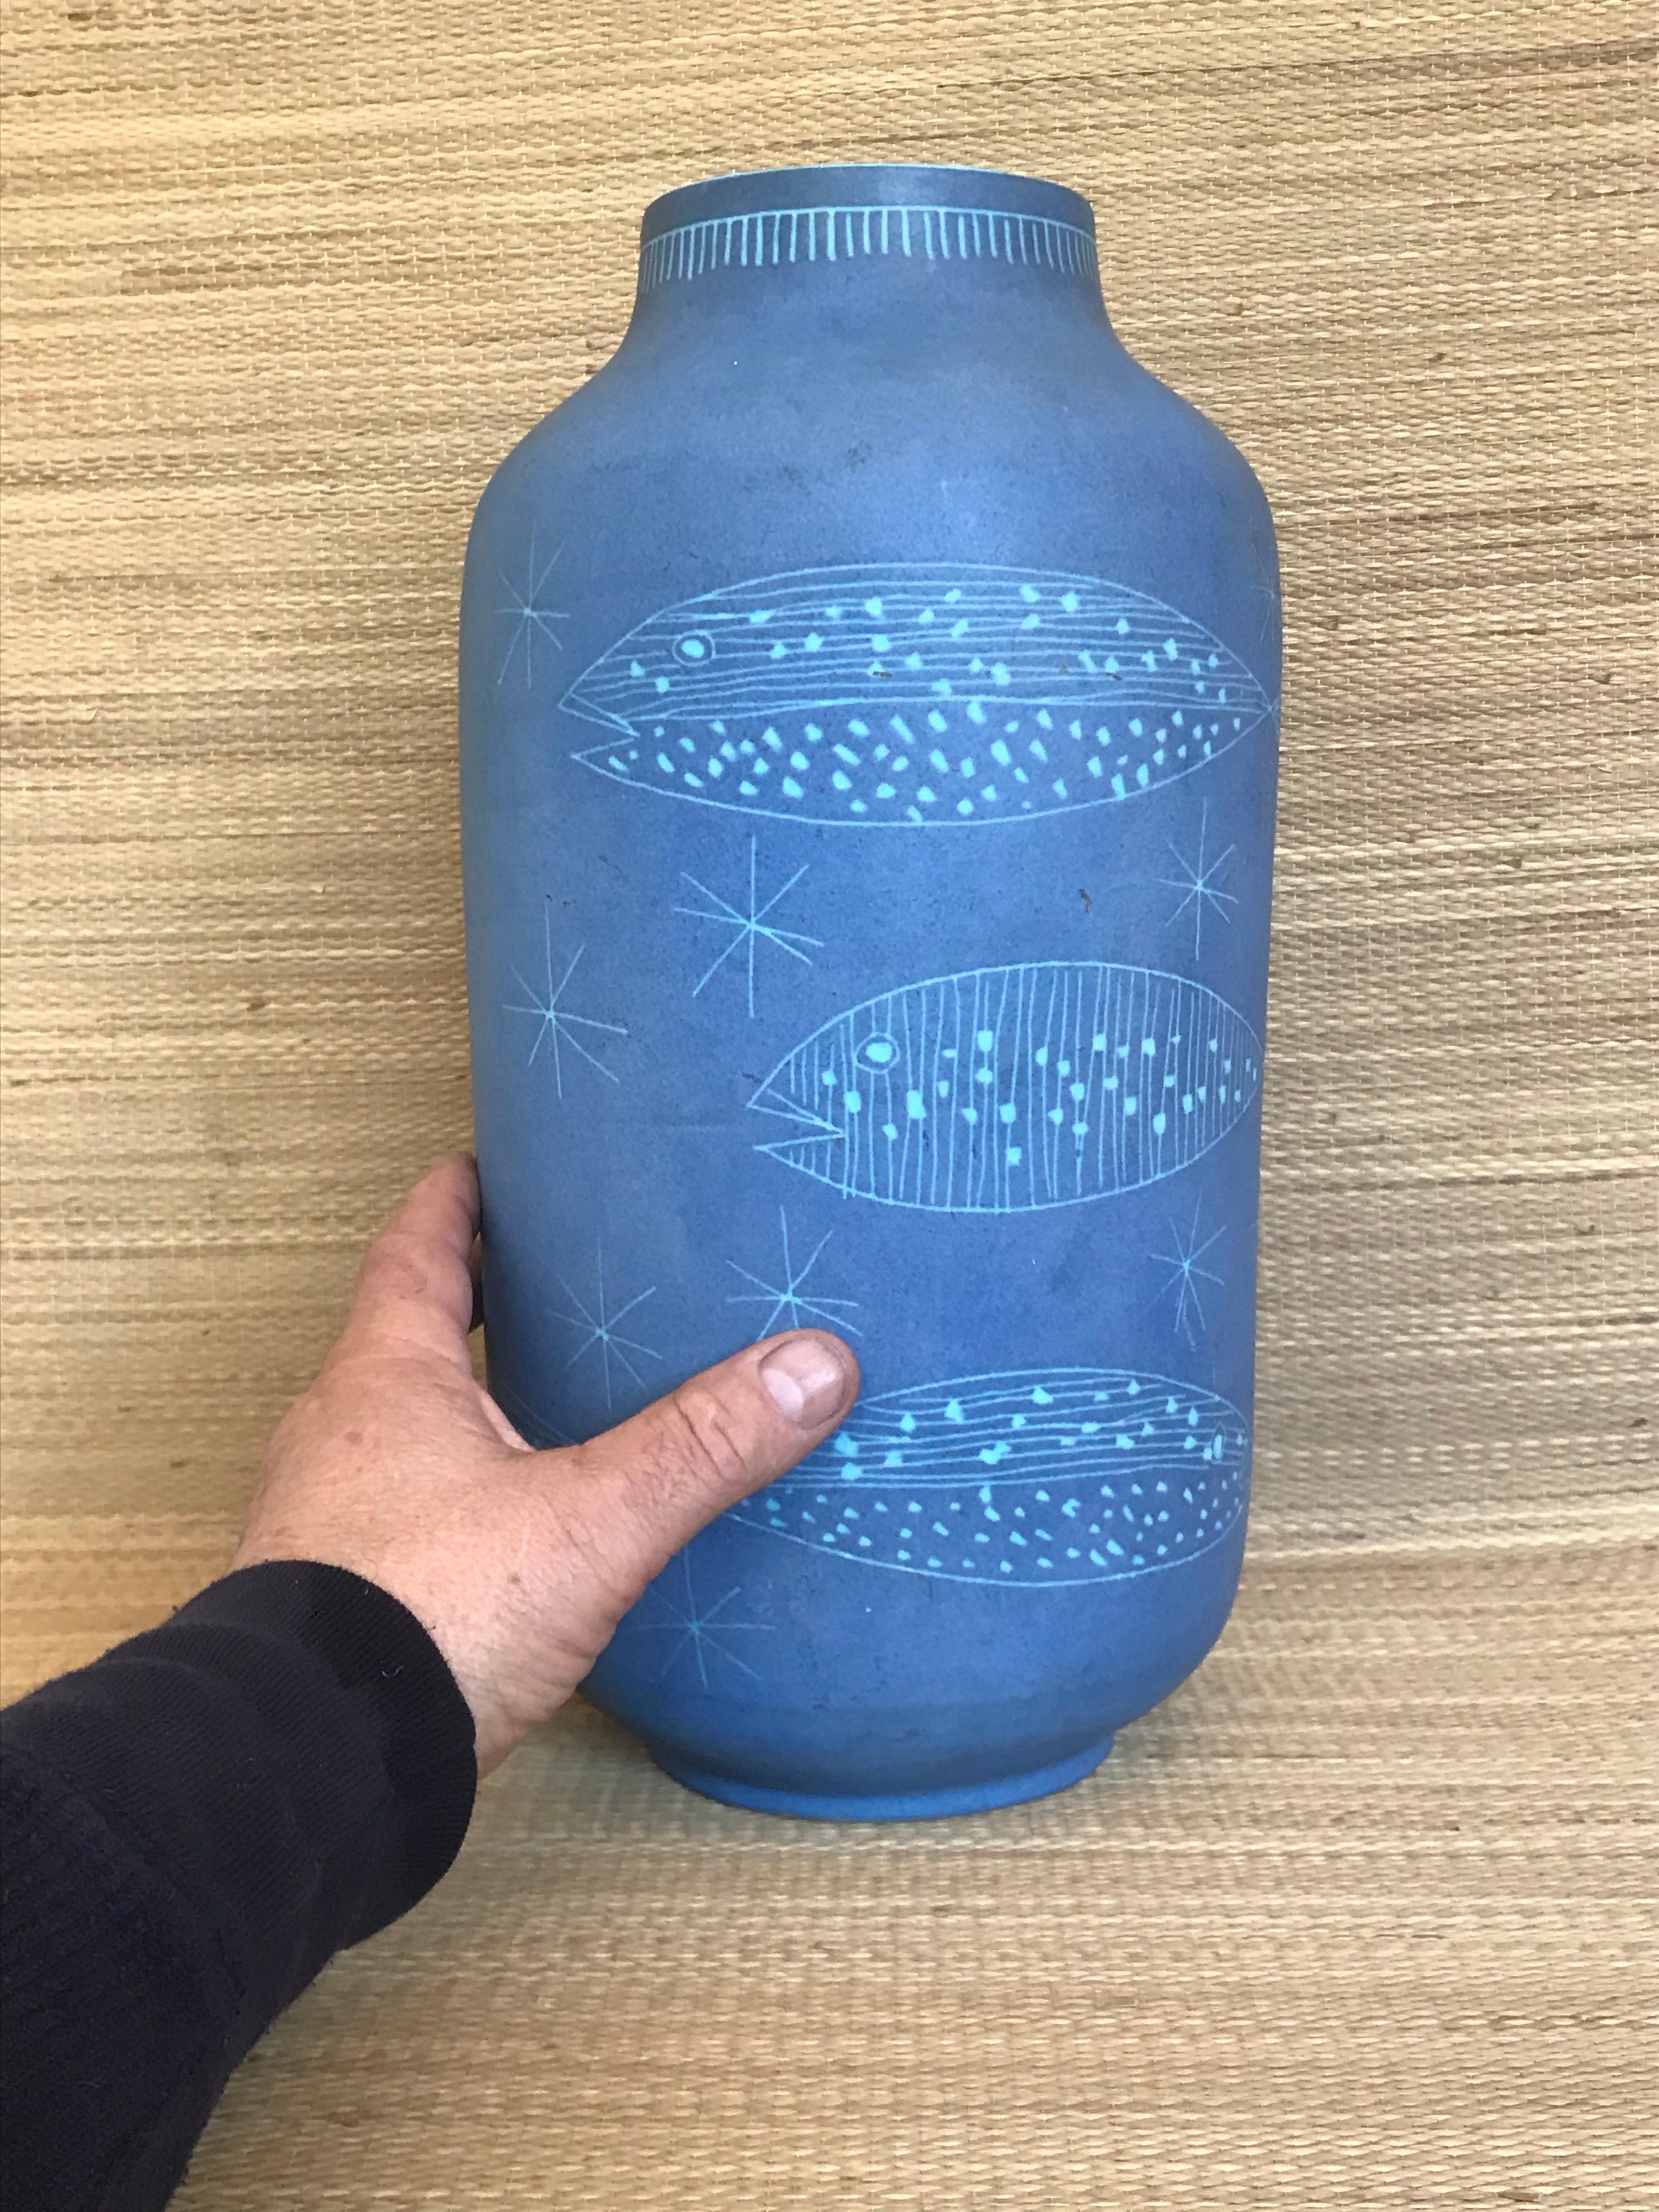 Great scale
Amazing periwinkle mat glaze
Fun hand carved aquatic design
A strong piece that can stand by itself as a decorative element or with flowers and branches
(one small tight hairline crack inside the rim, does not go through to the